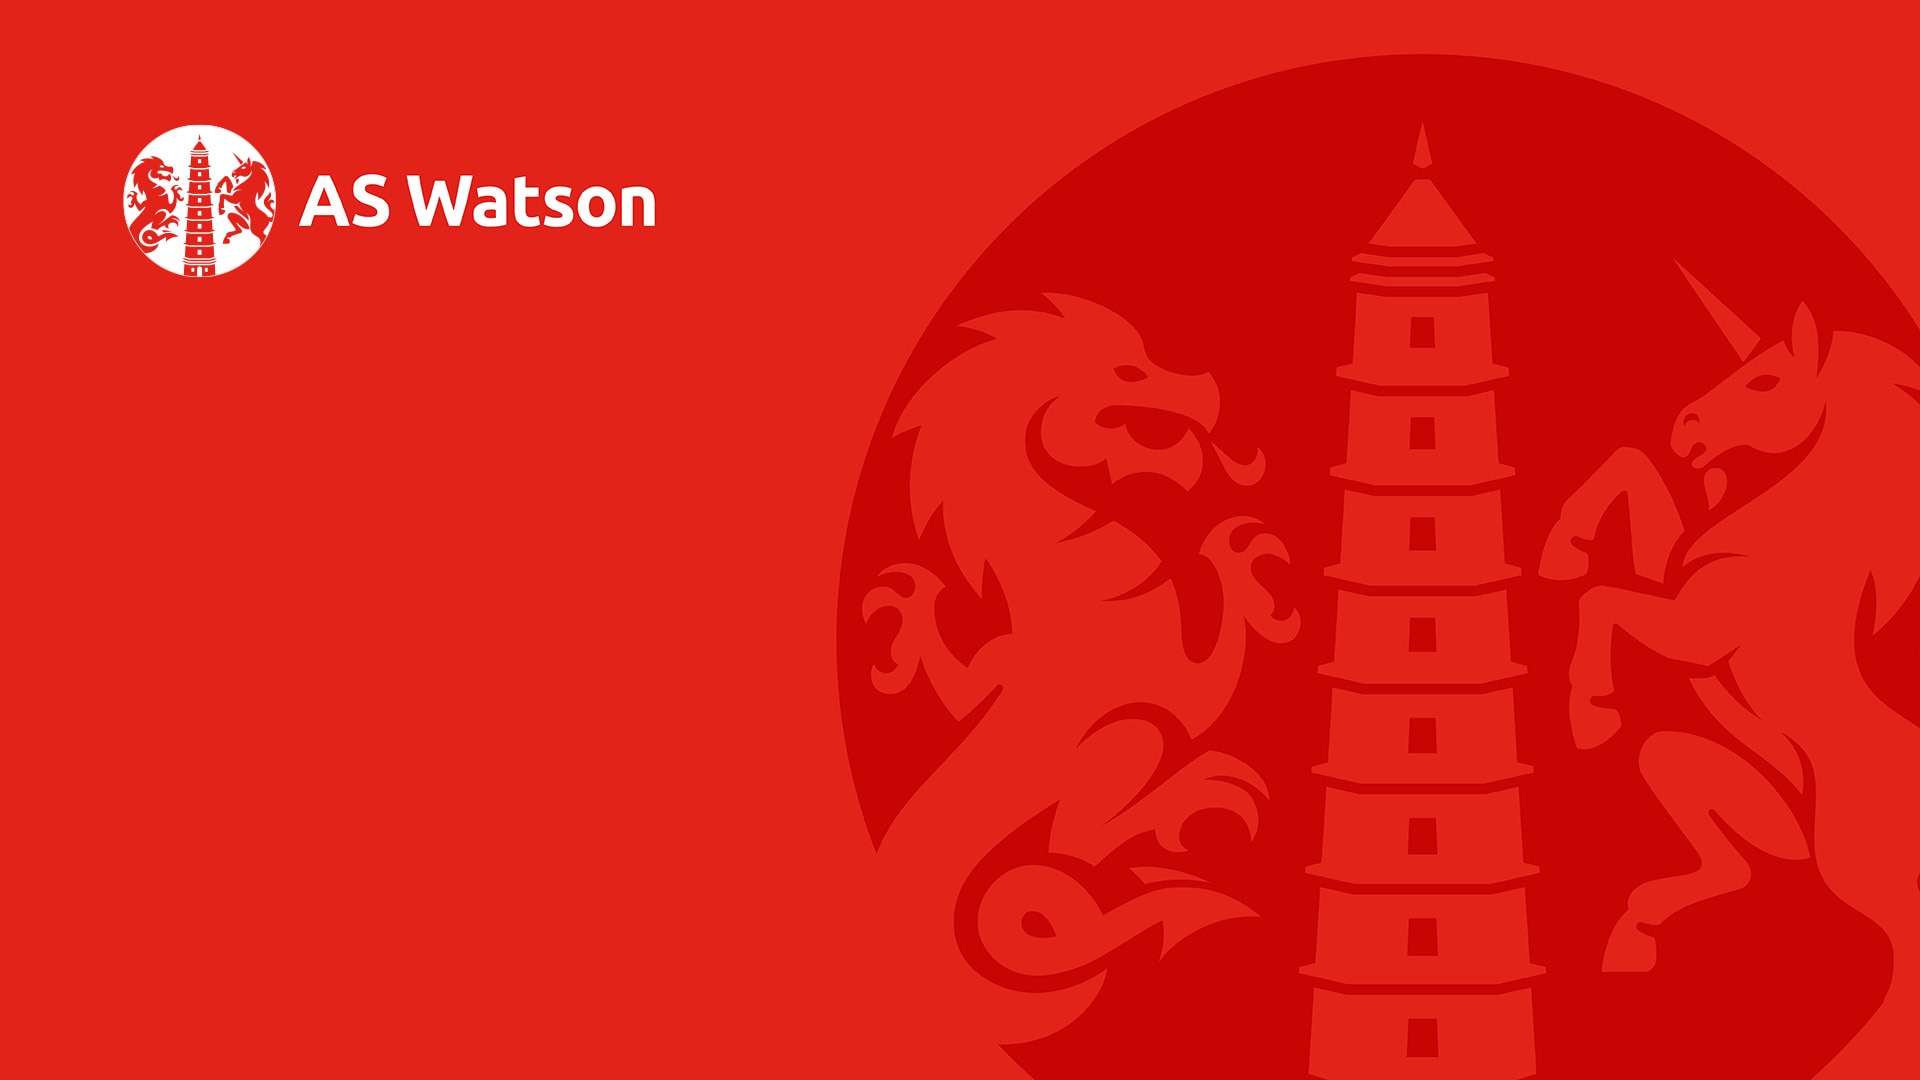 AS Watson Group Refreshes its Brand Identity